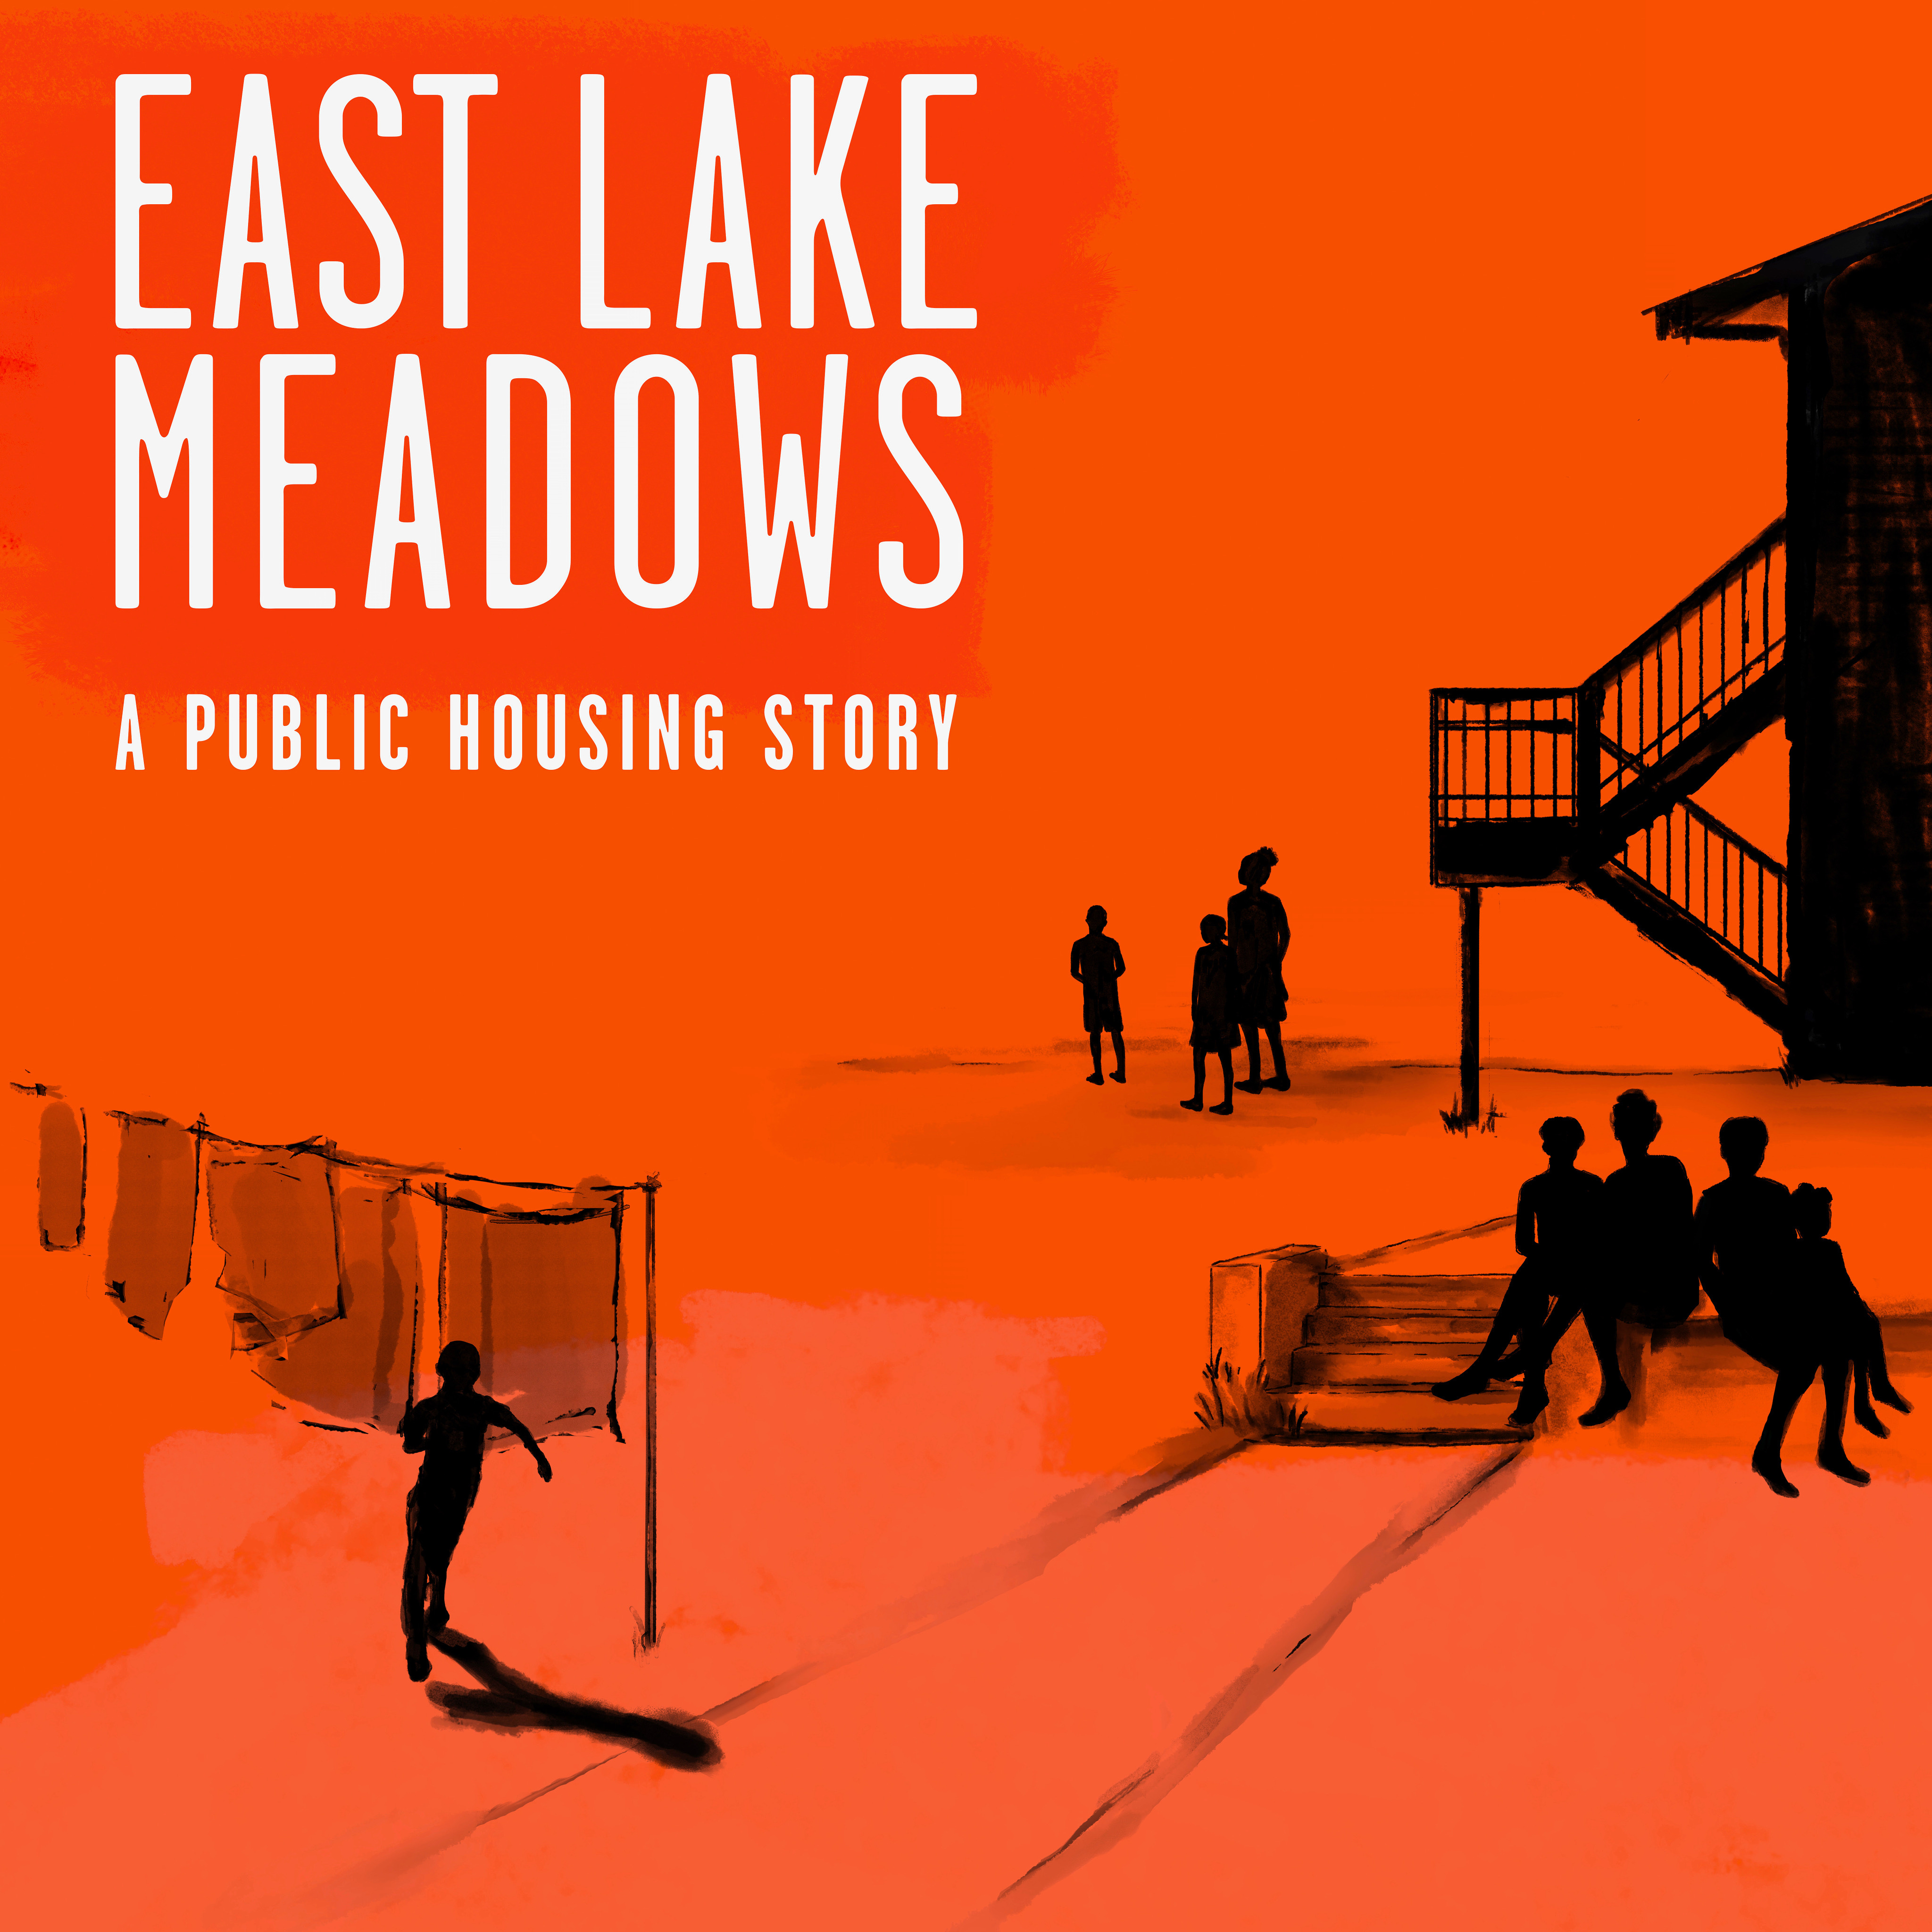 How to watch and stream East Lake Meadows: A Public Housing Story